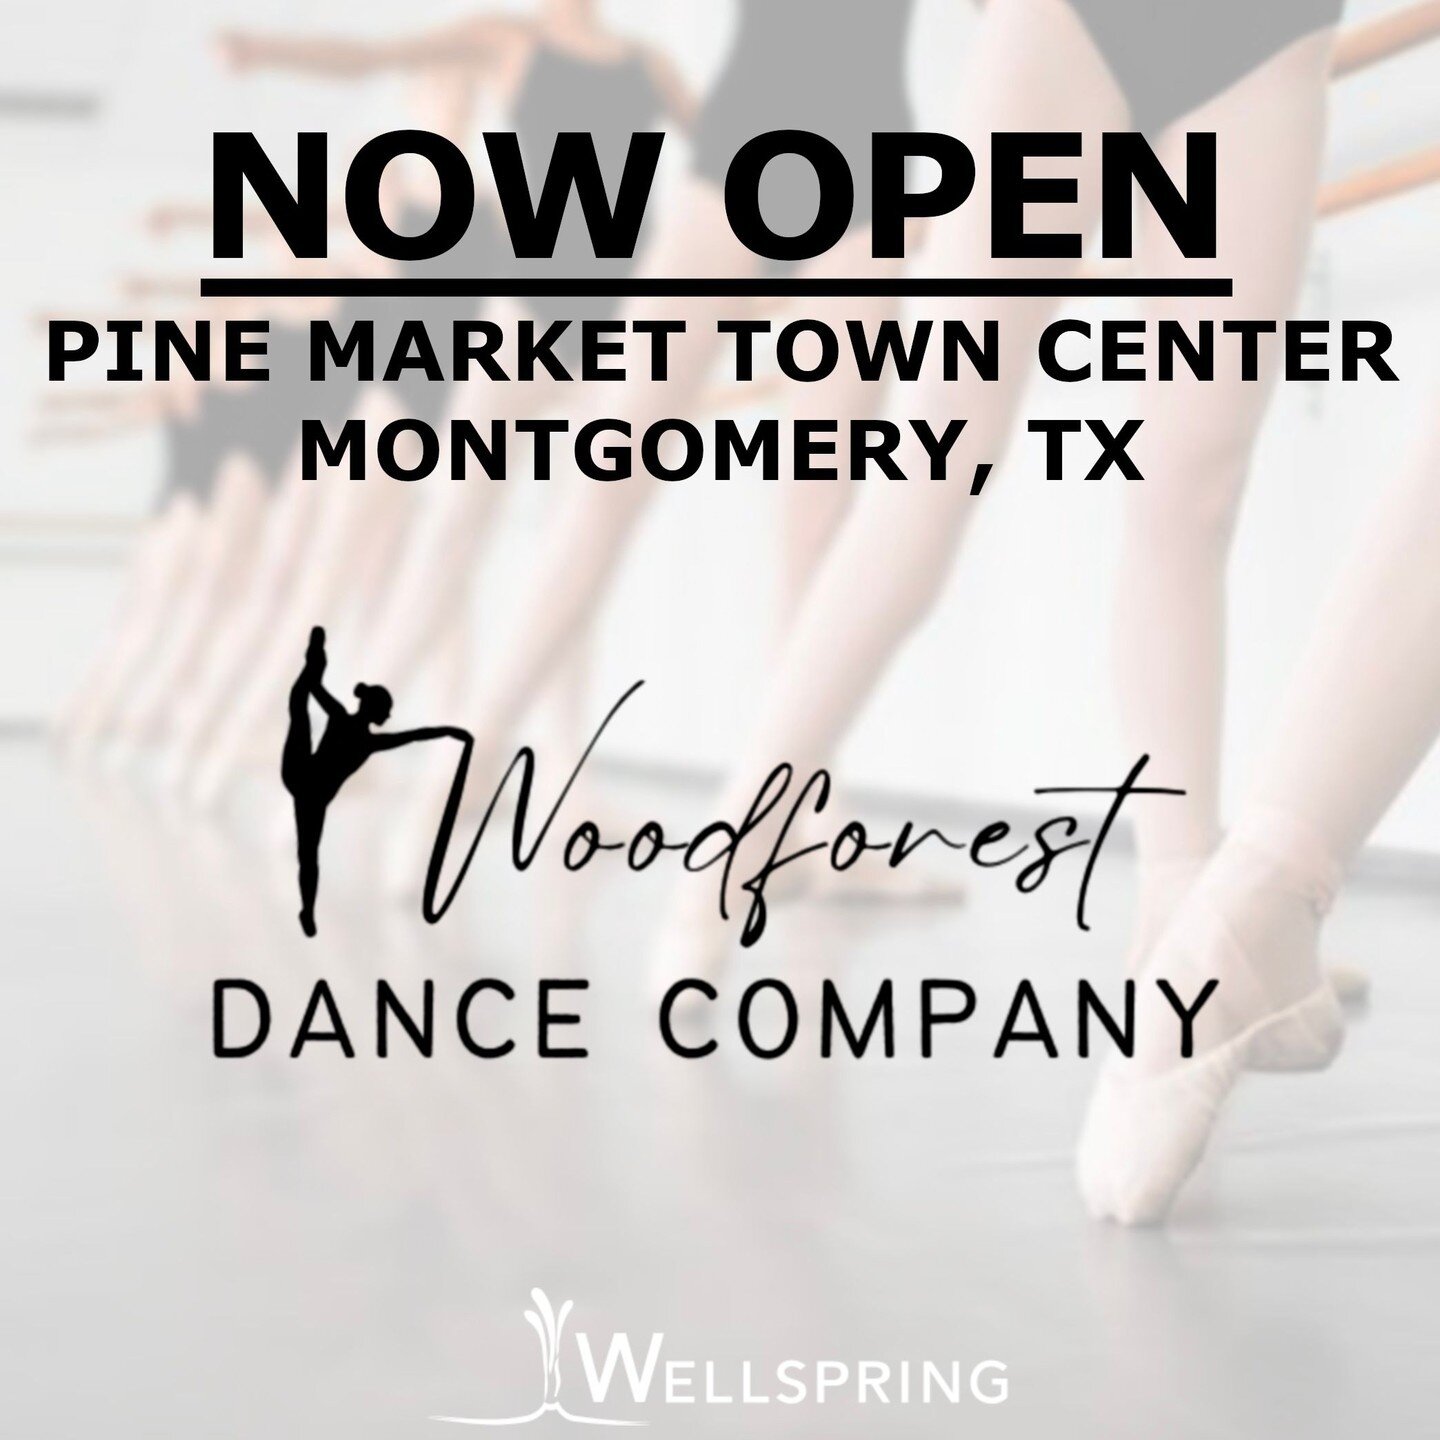 Woodforest Dance Company is open and operating in Woodforest at Pine Market!

#wellspringcre #cre #retail #tenantrep #wdc #woodforest #iwanttogodancing